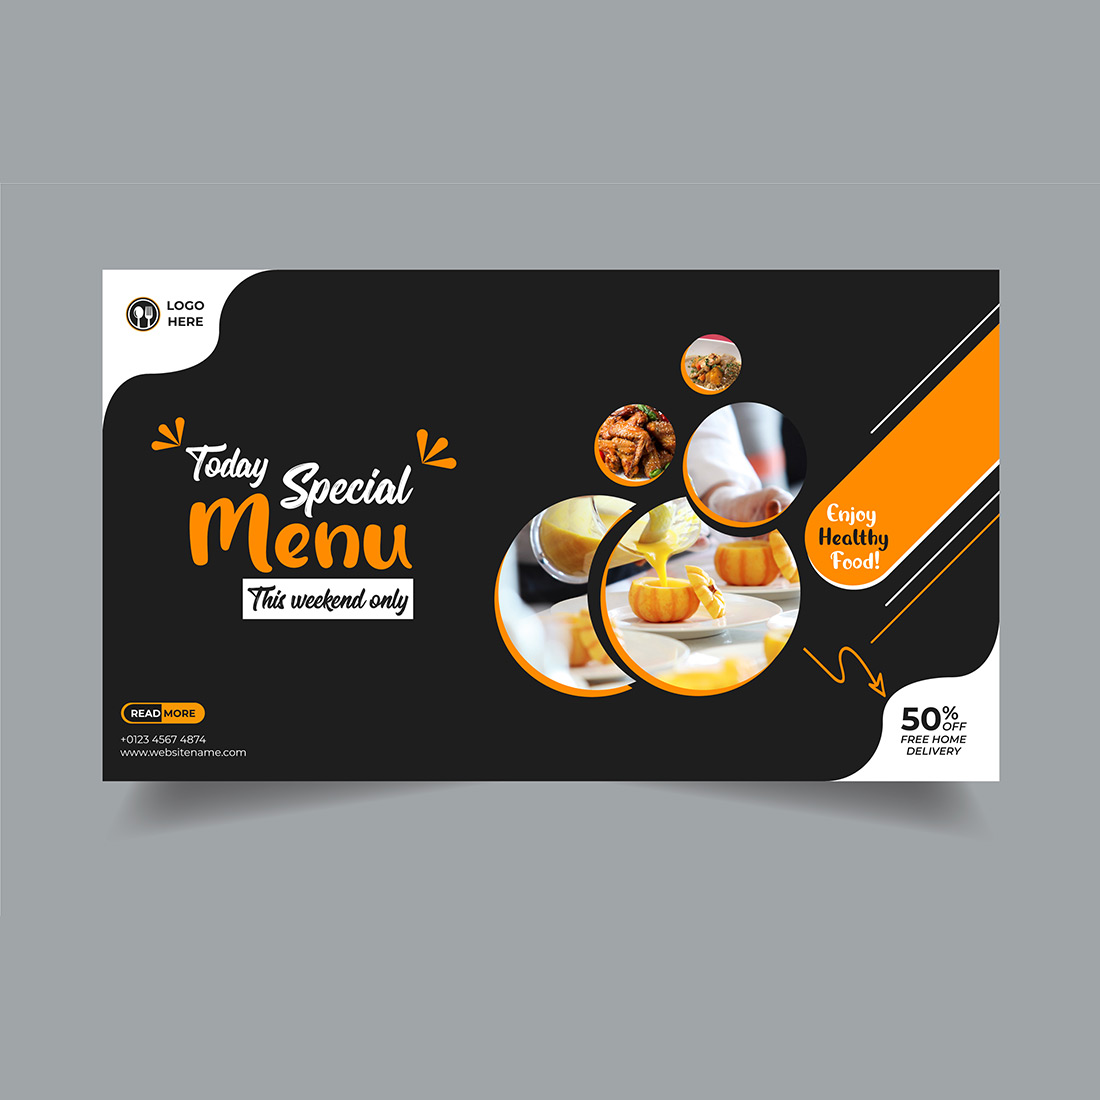 A black and orange menu with a picture of food.